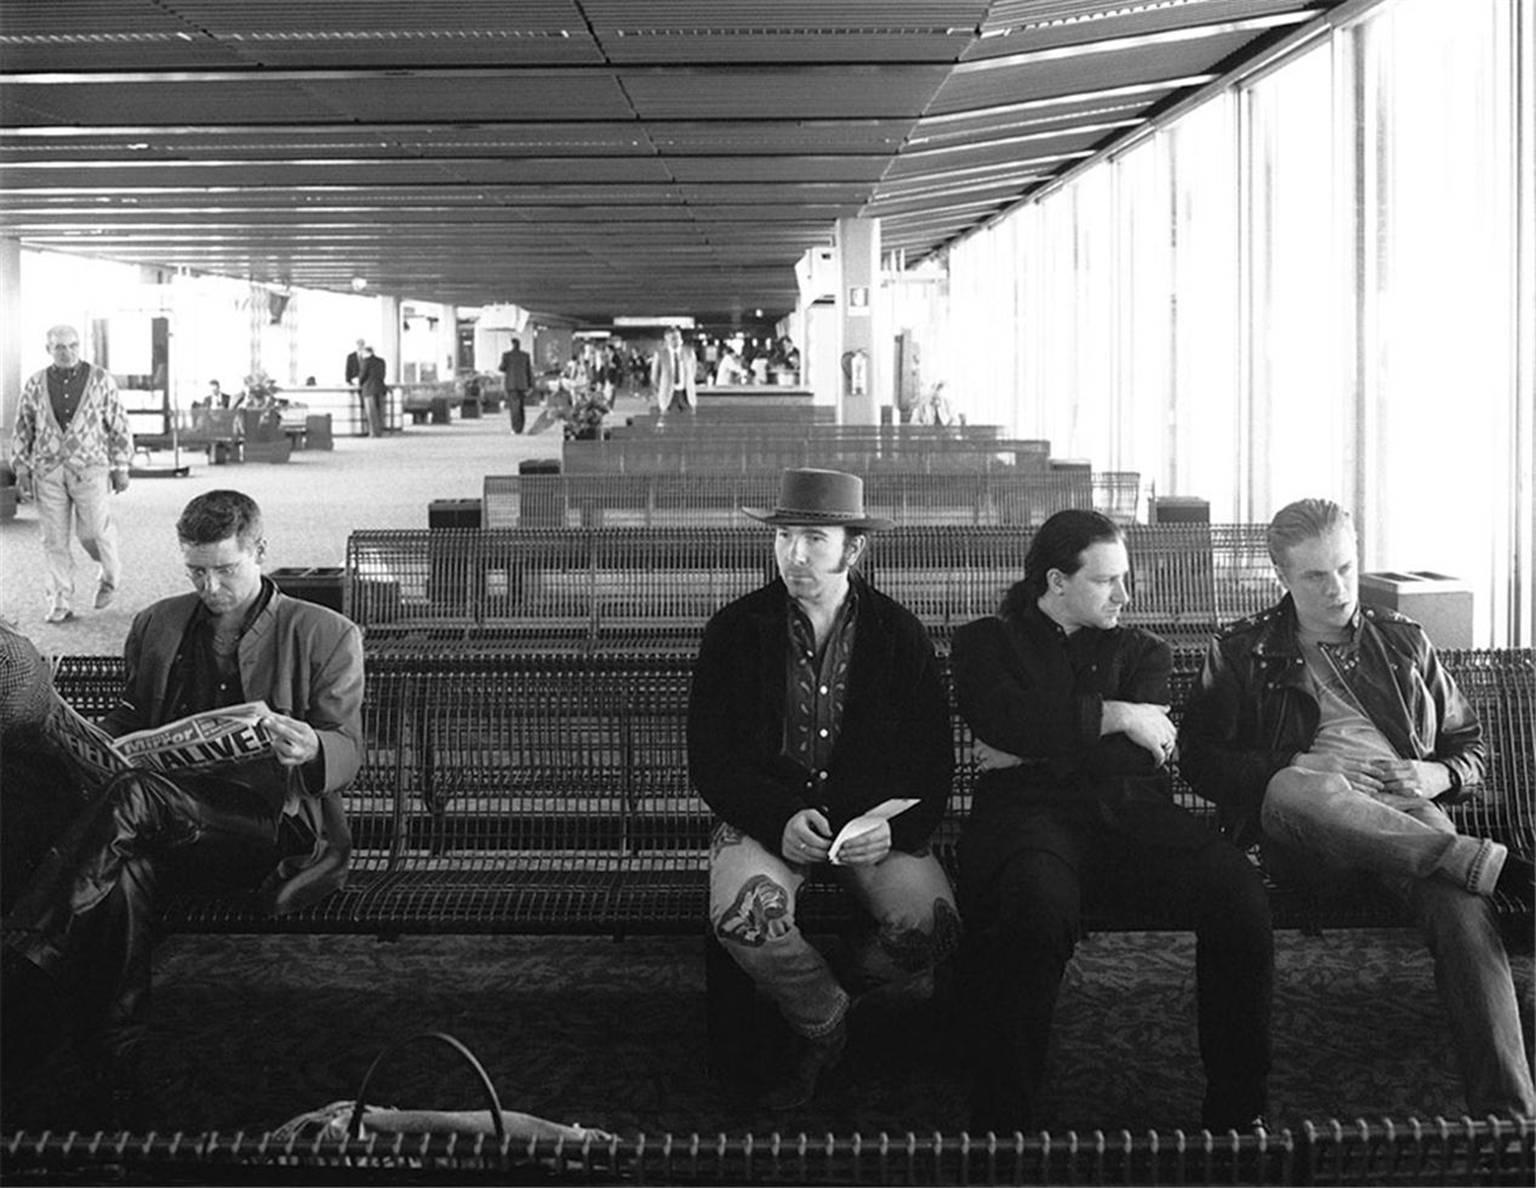 Colm Henry Black and White Photograph - U2 waiting at Rome Airport in 1989